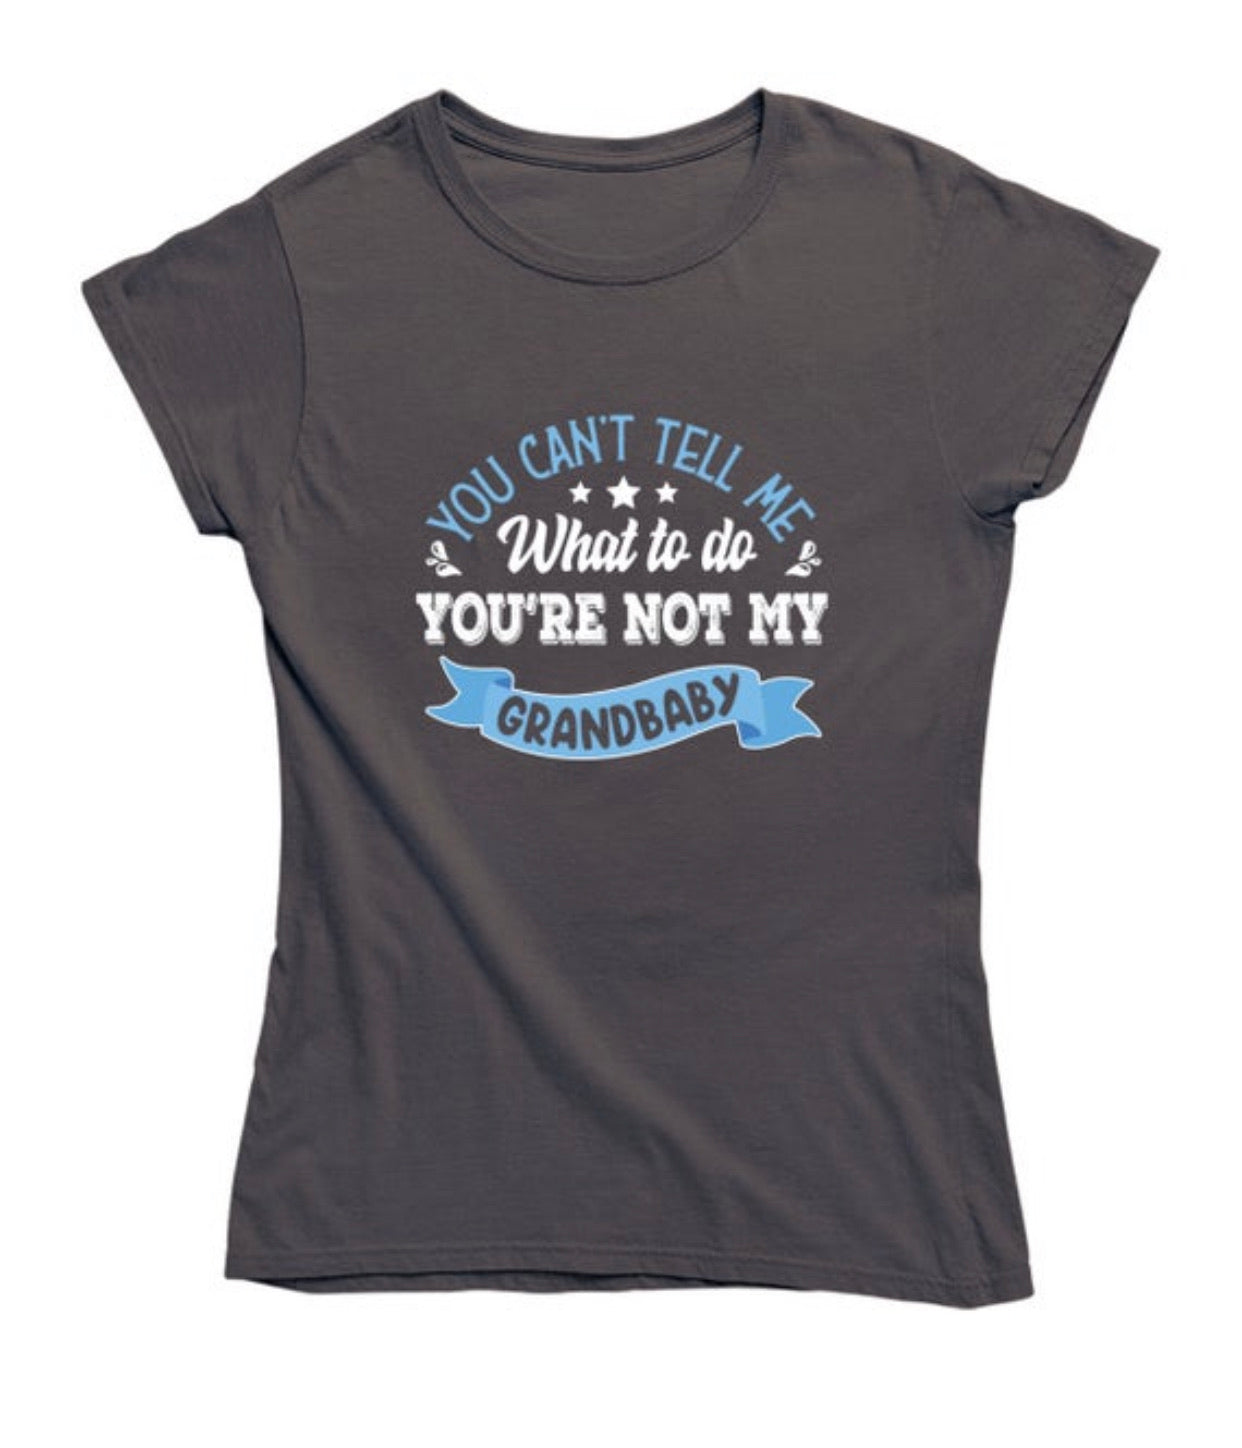 You Can’t Tell Me What To Do T Shirt